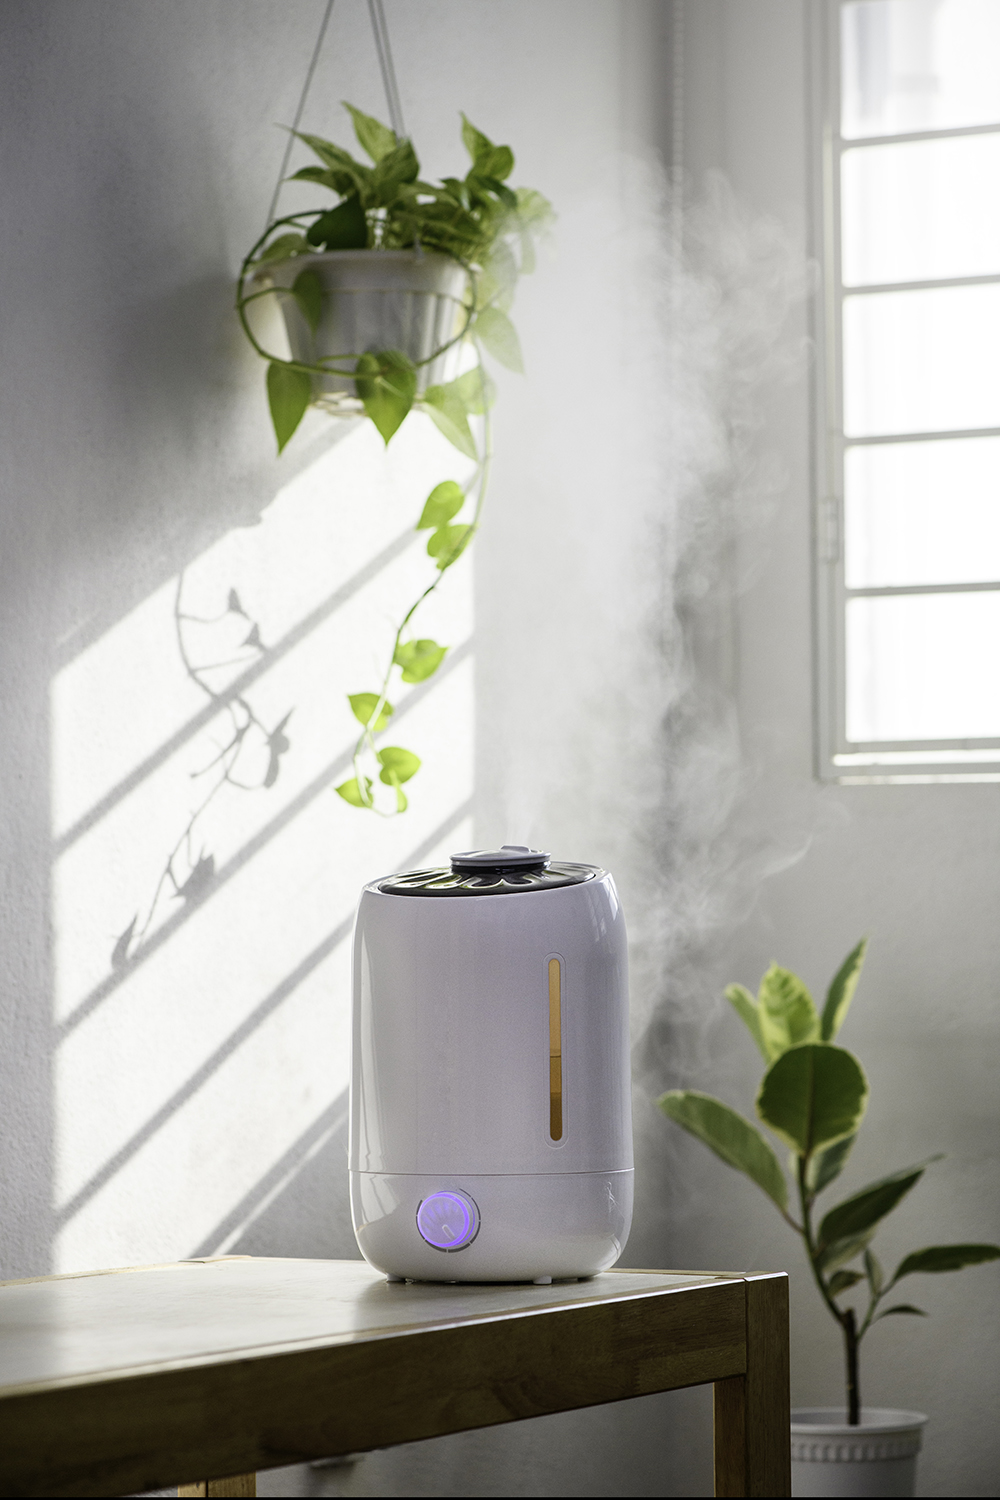 In the background, one plant hangs from the ceiling while another potted plant sits on the floor. In the foreground is a table with a humidifier on top.